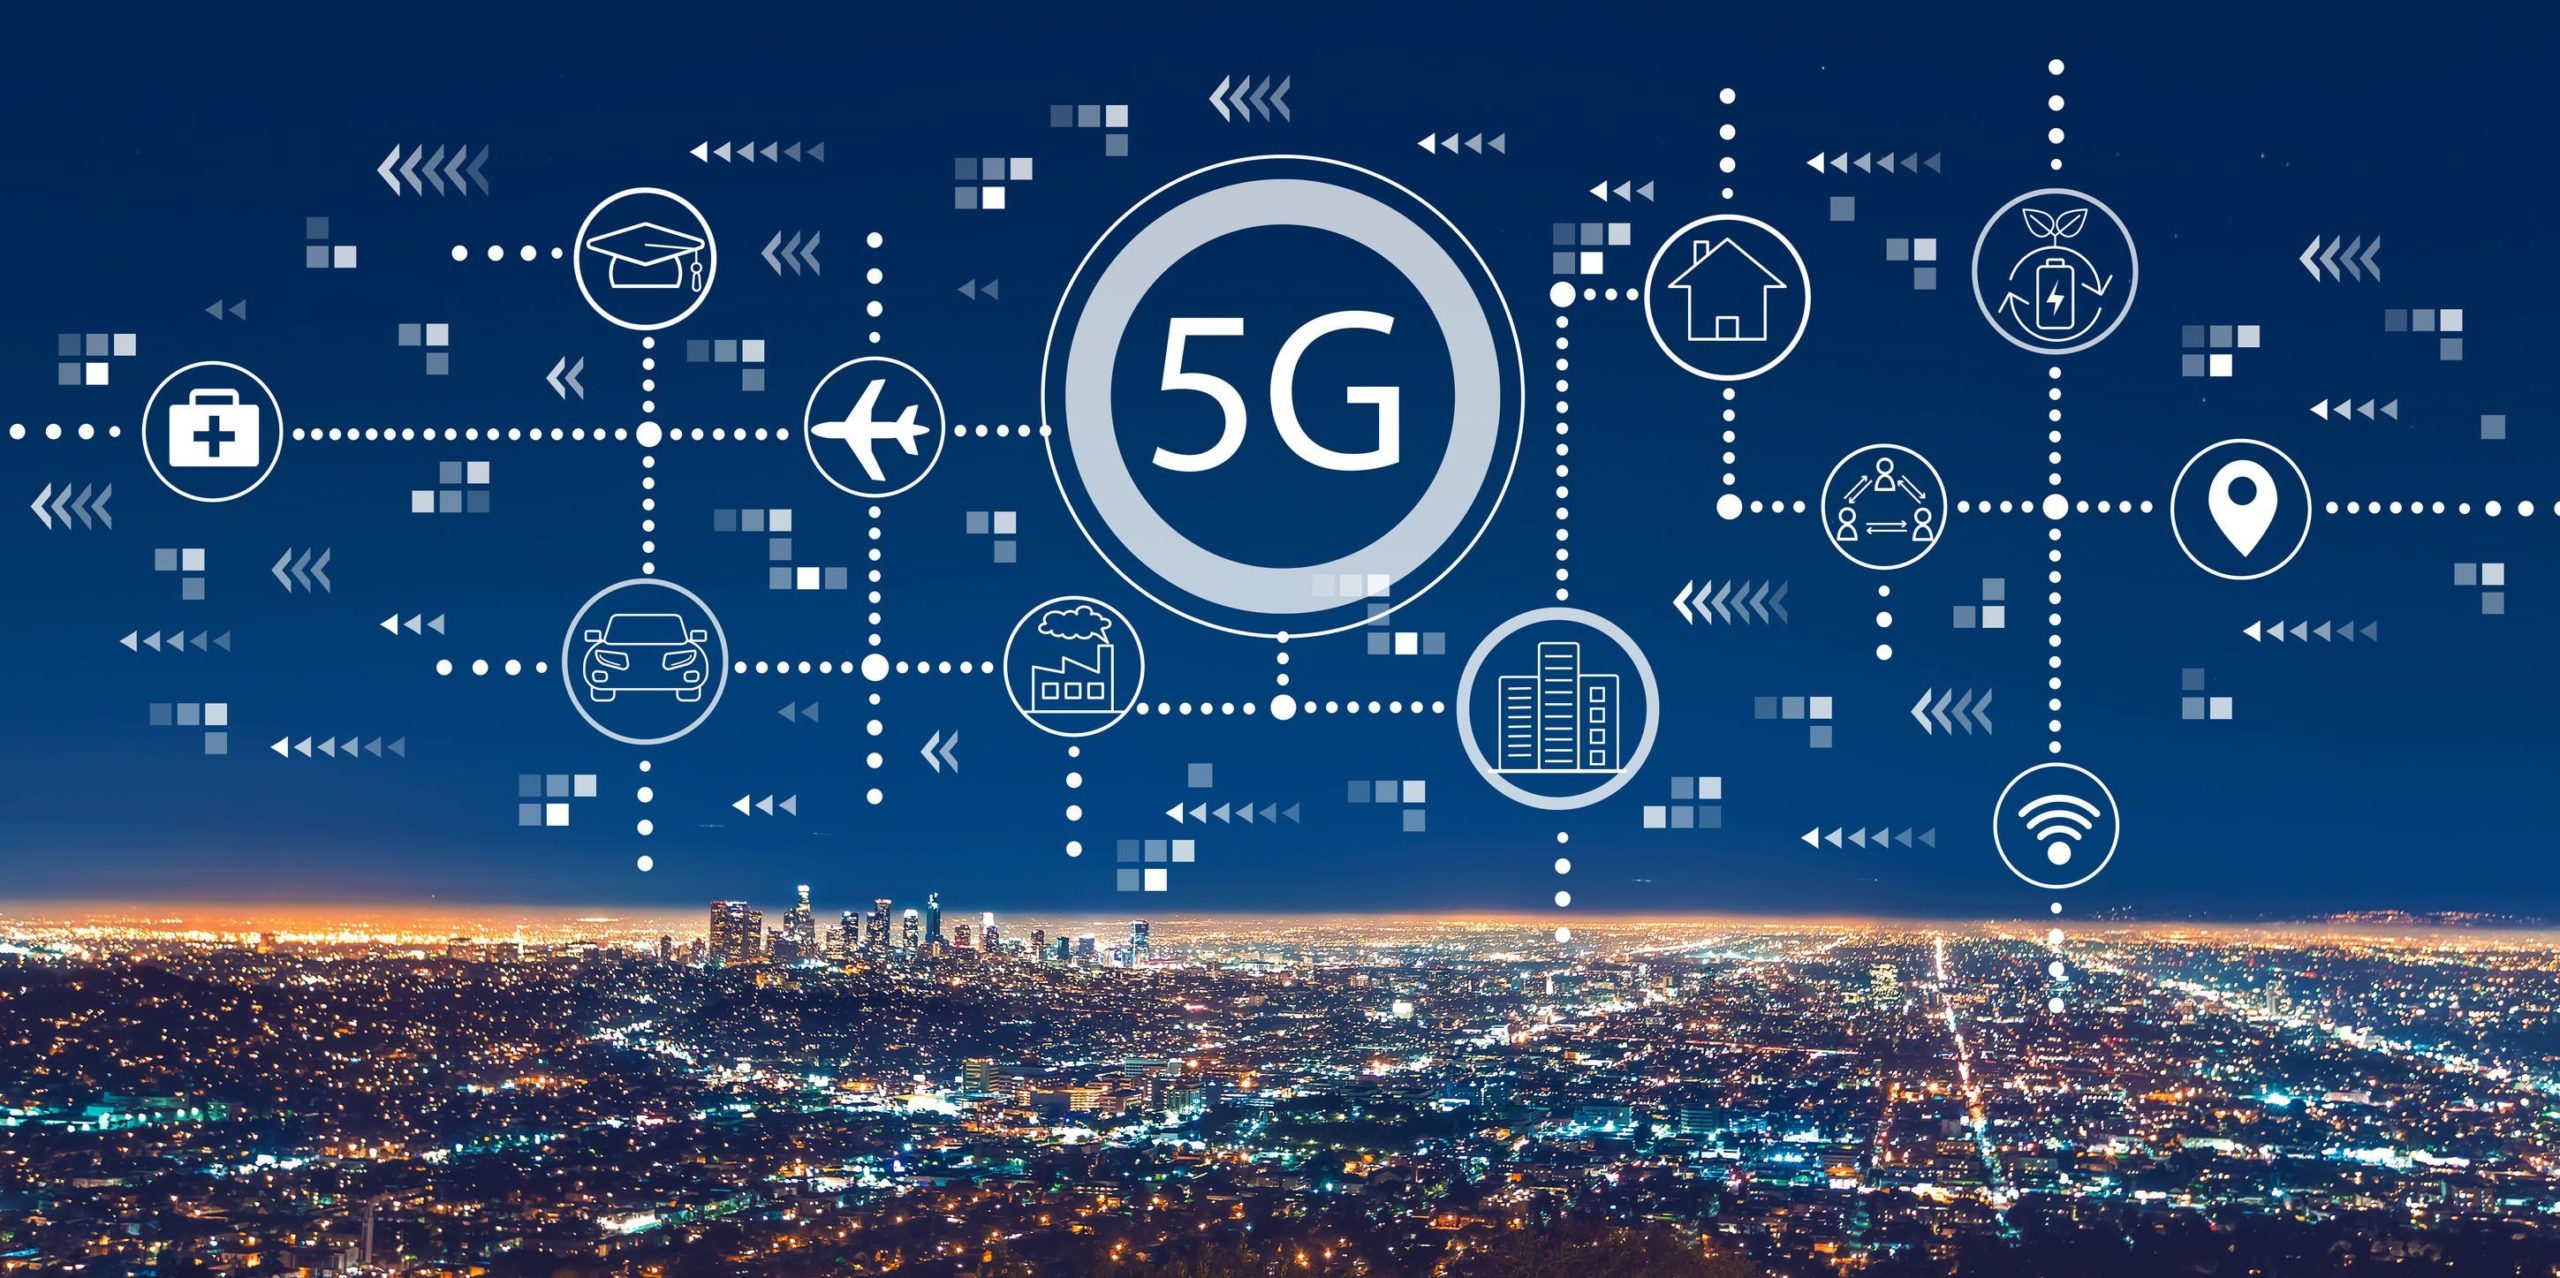 5G network is finally here – This is what you need to know